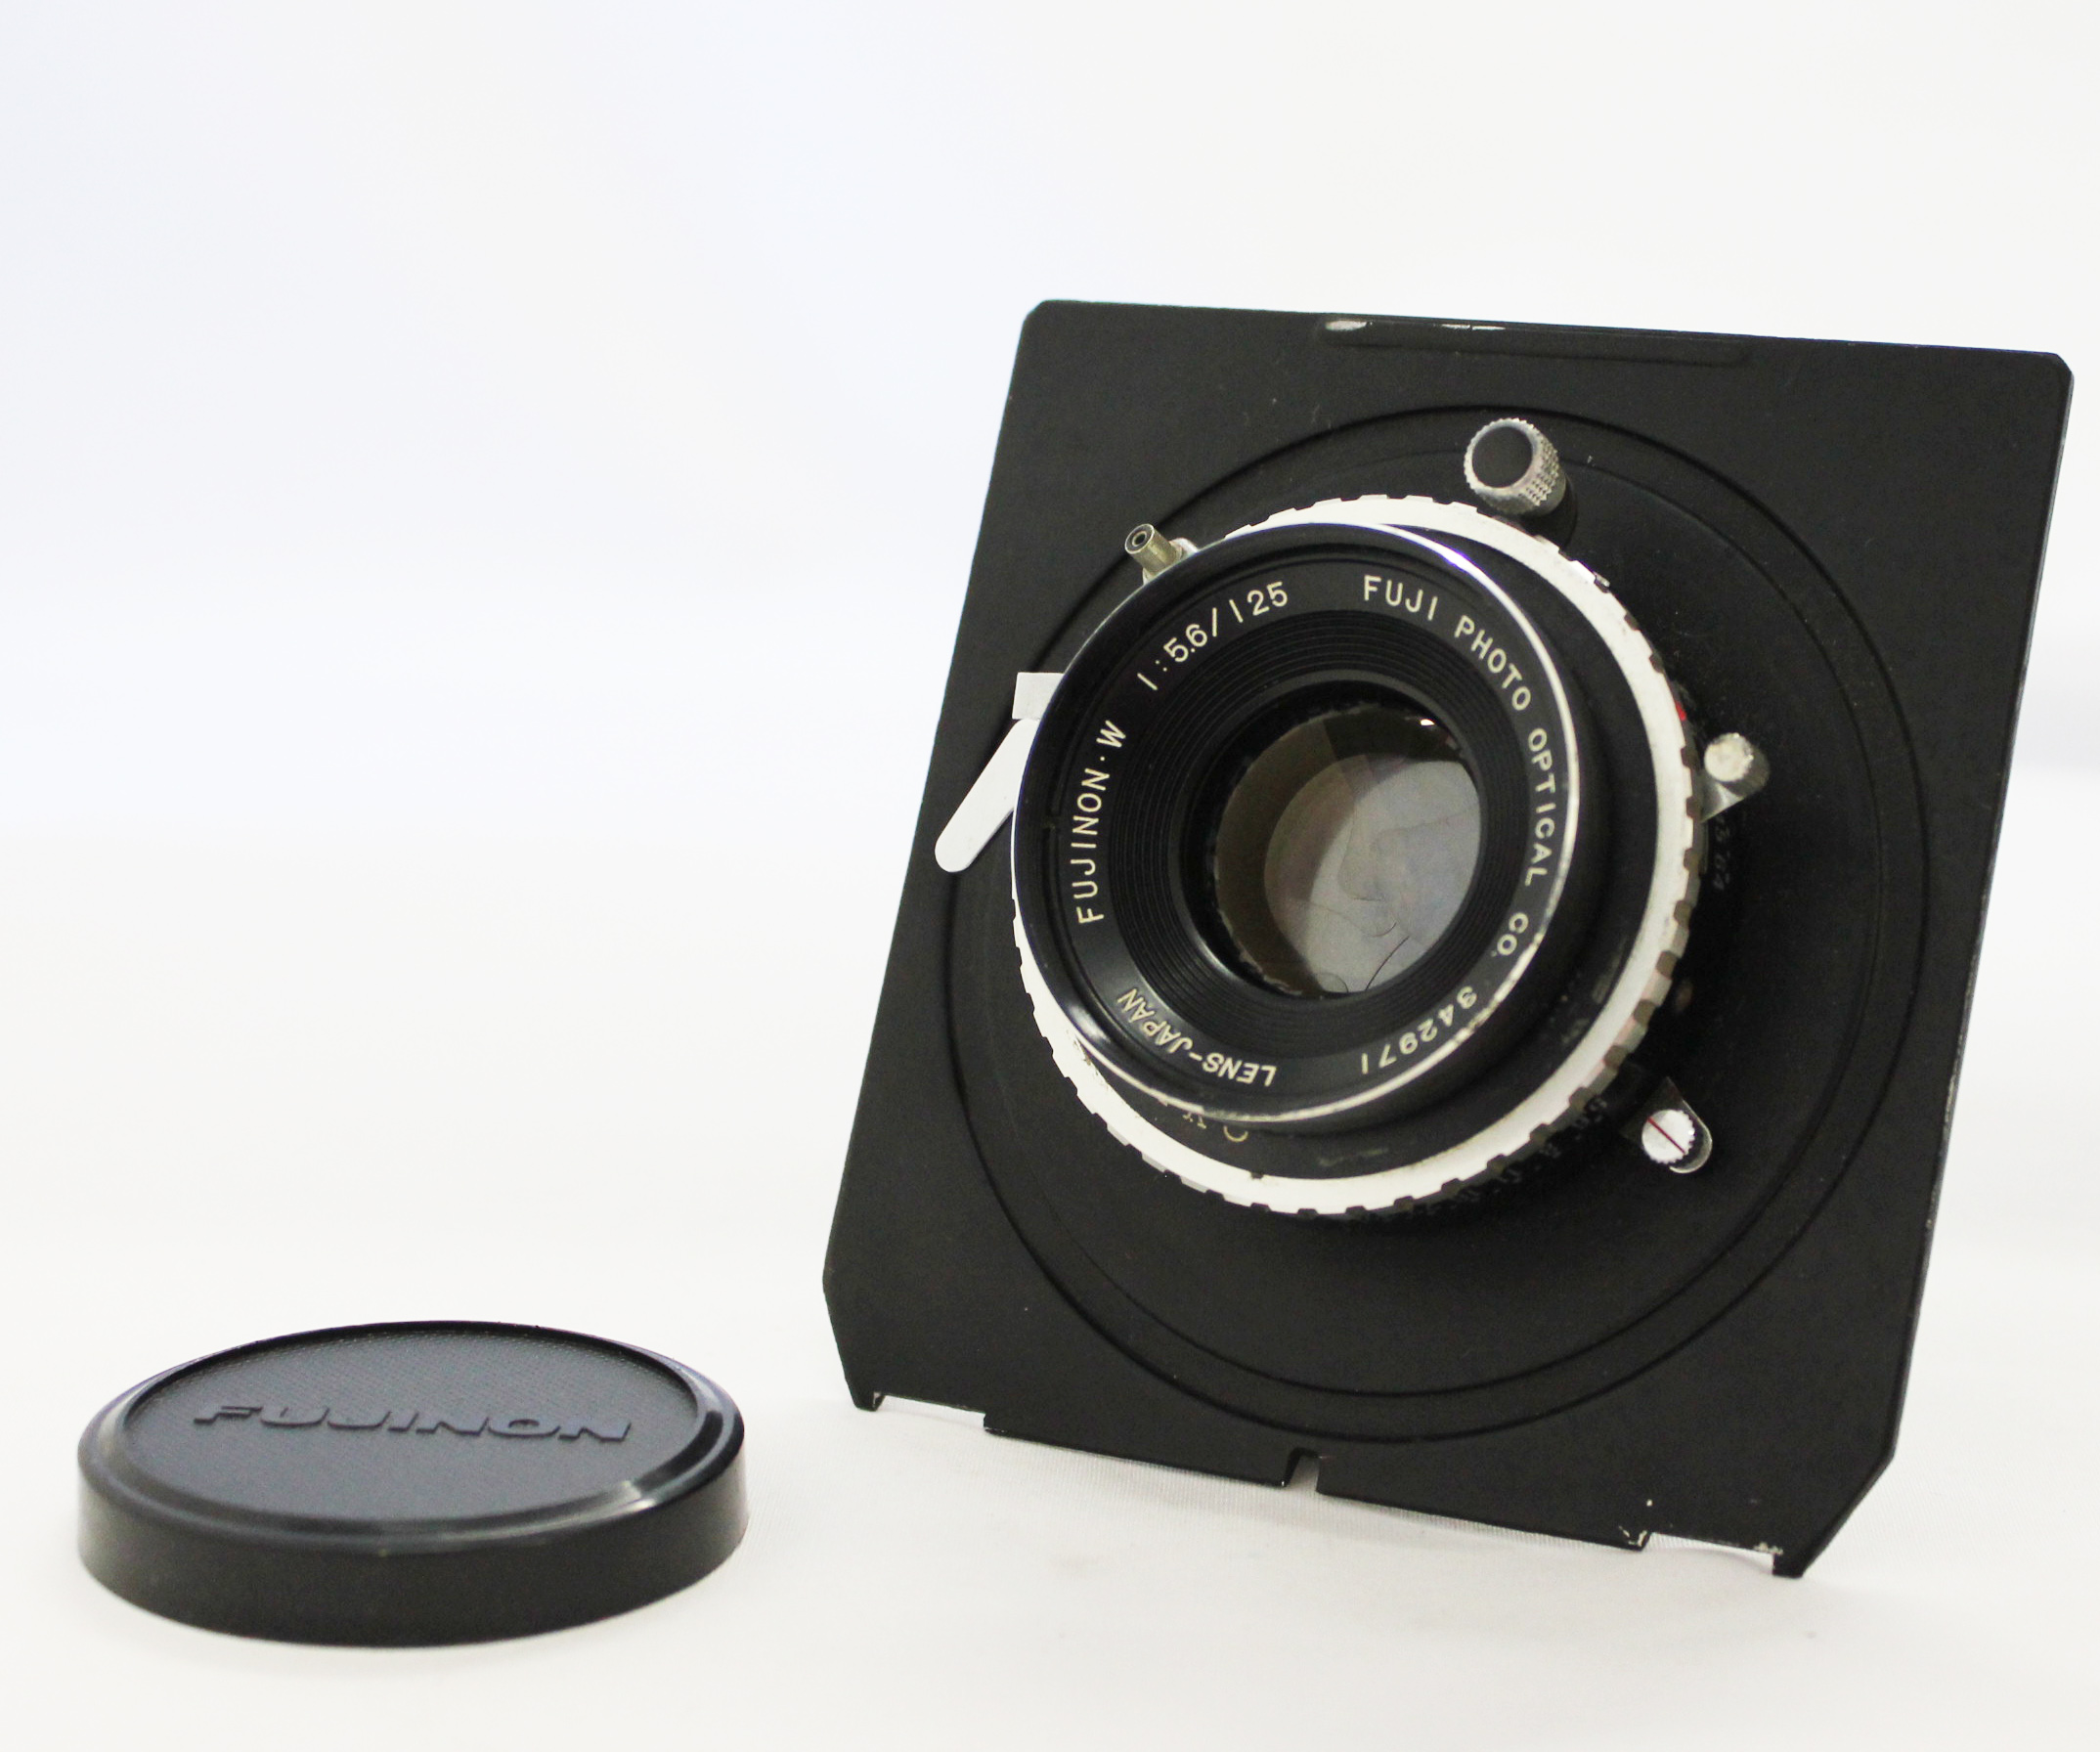 Japan Used Camera Shop | [Excellent++++] Fujinon W 125mm F/5.6 4x5 Large Format Lens with Seiko Shutter from Japan